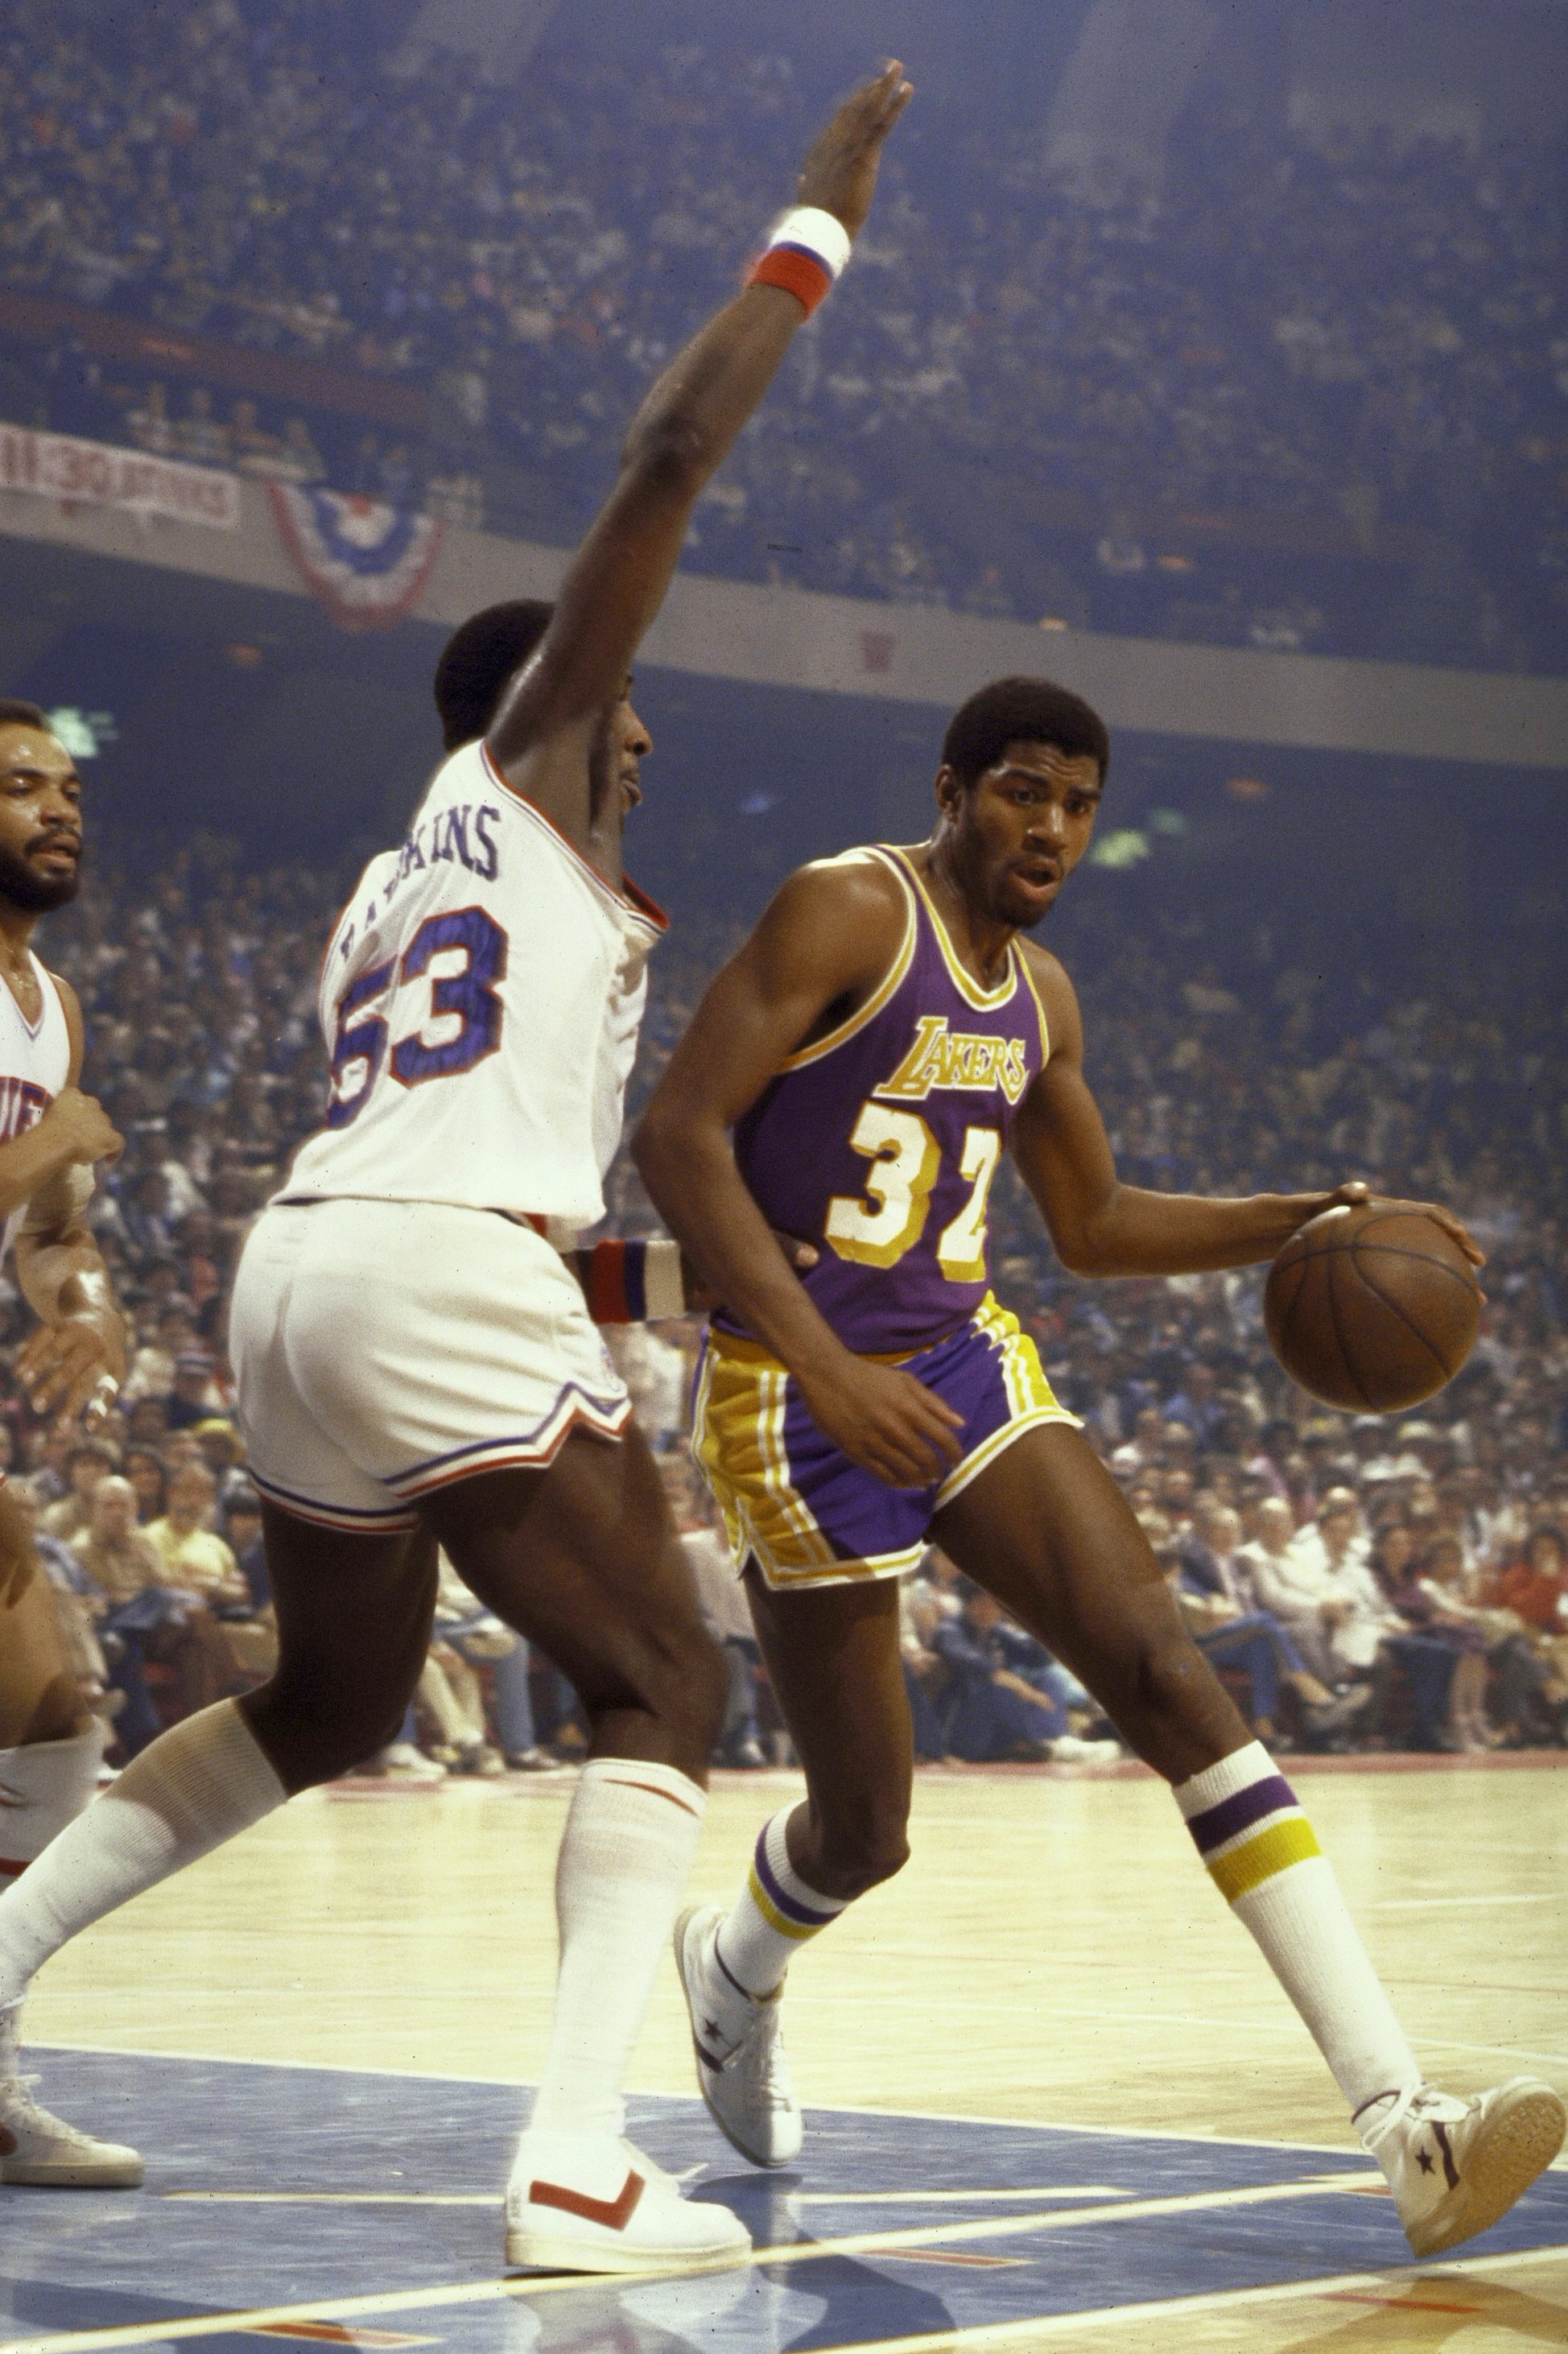 This is a photo of Magic Johnson in his 1980 season with the Lakers.